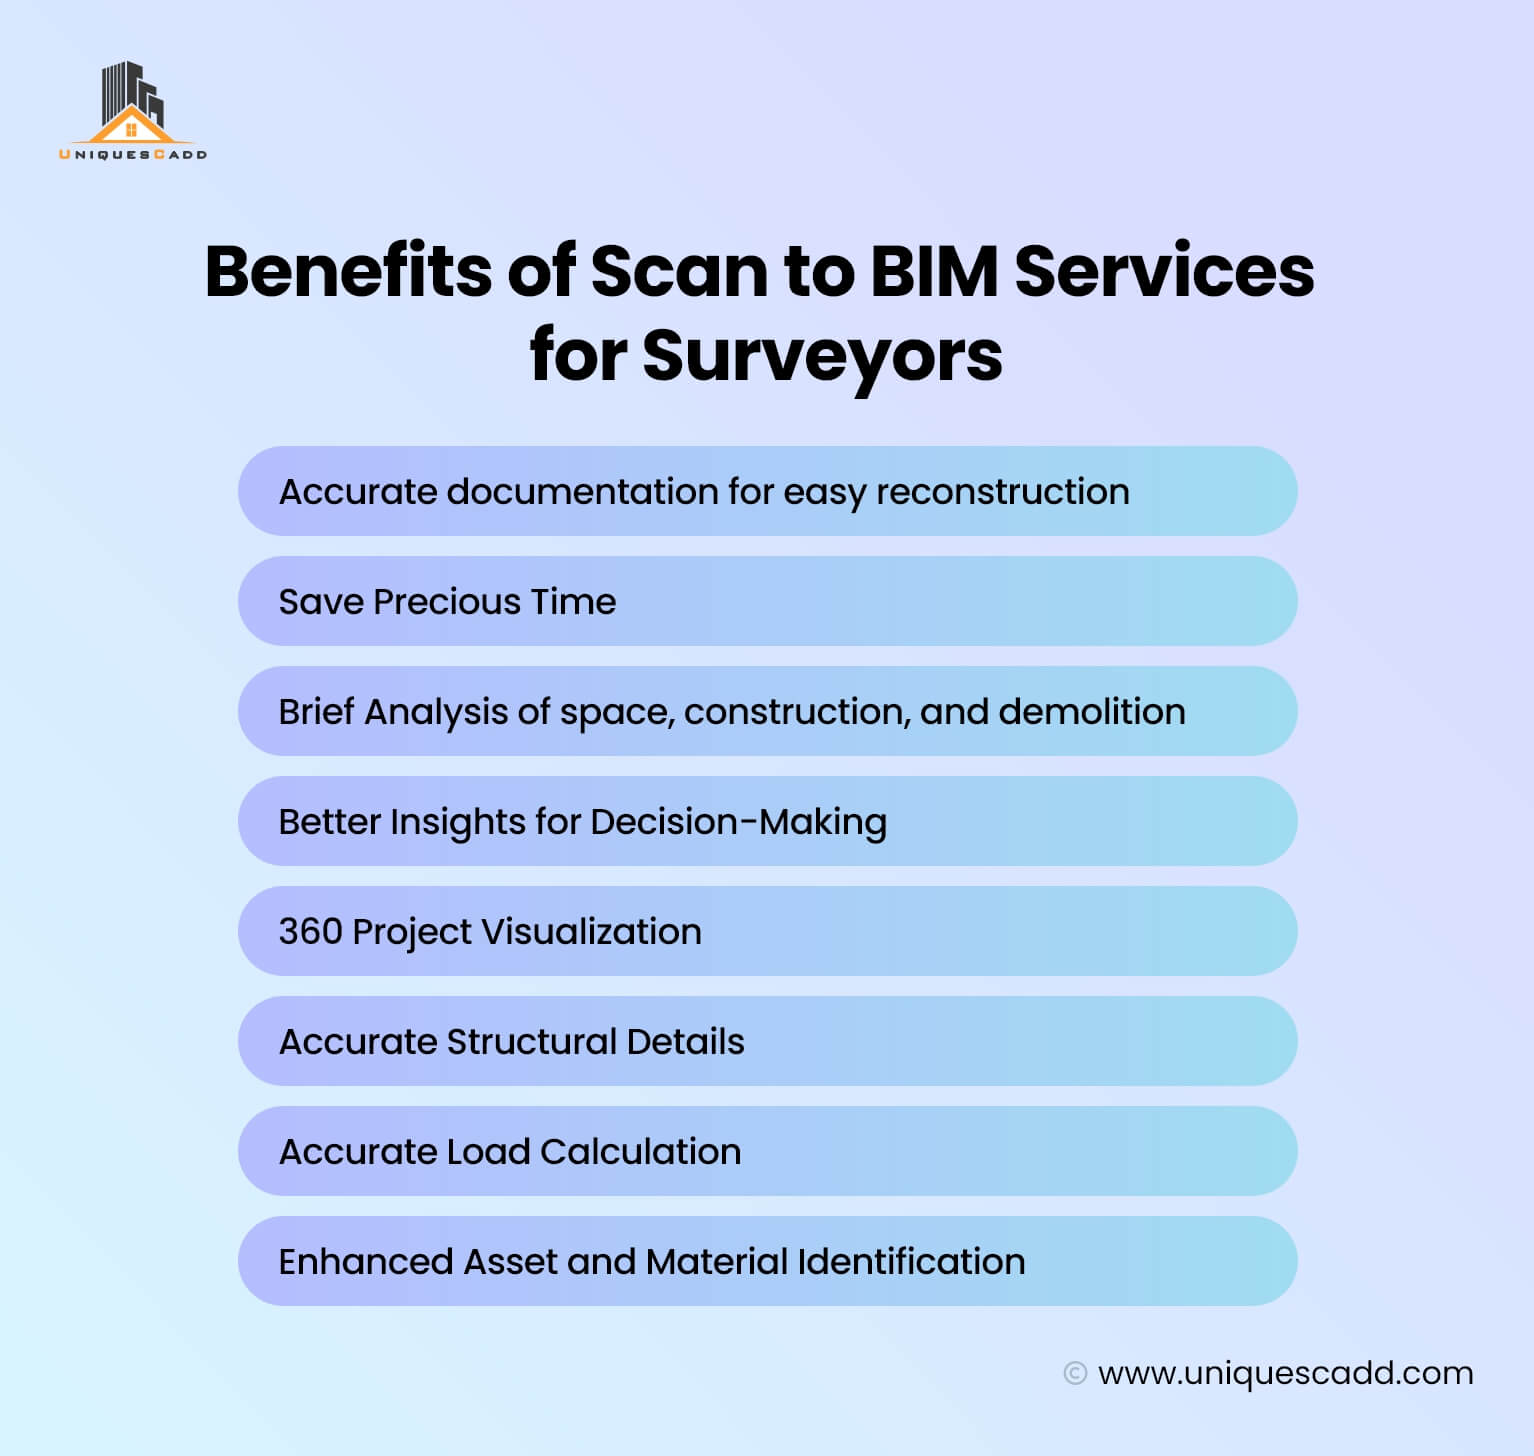 Benefits of Scan to BIM Services for Surveyors